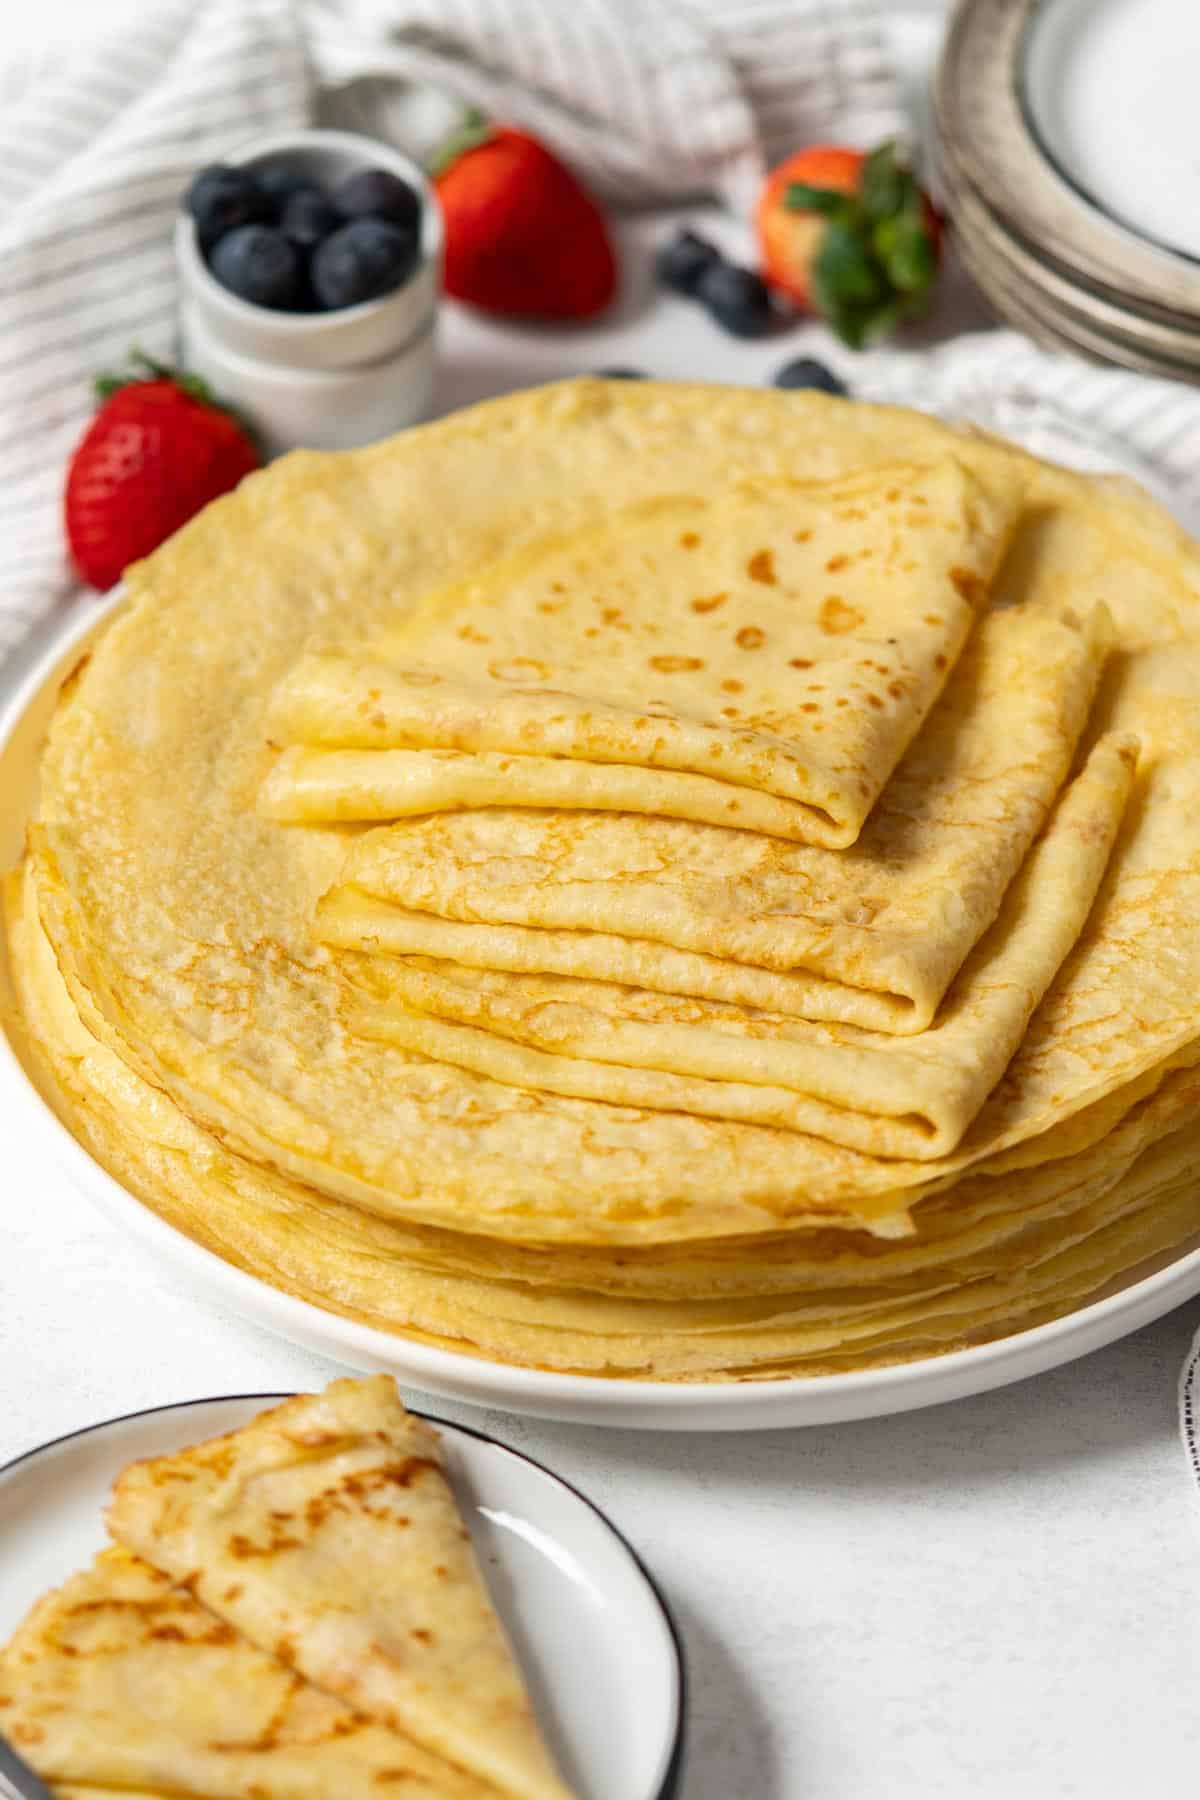 Crepes stacked in a plate.